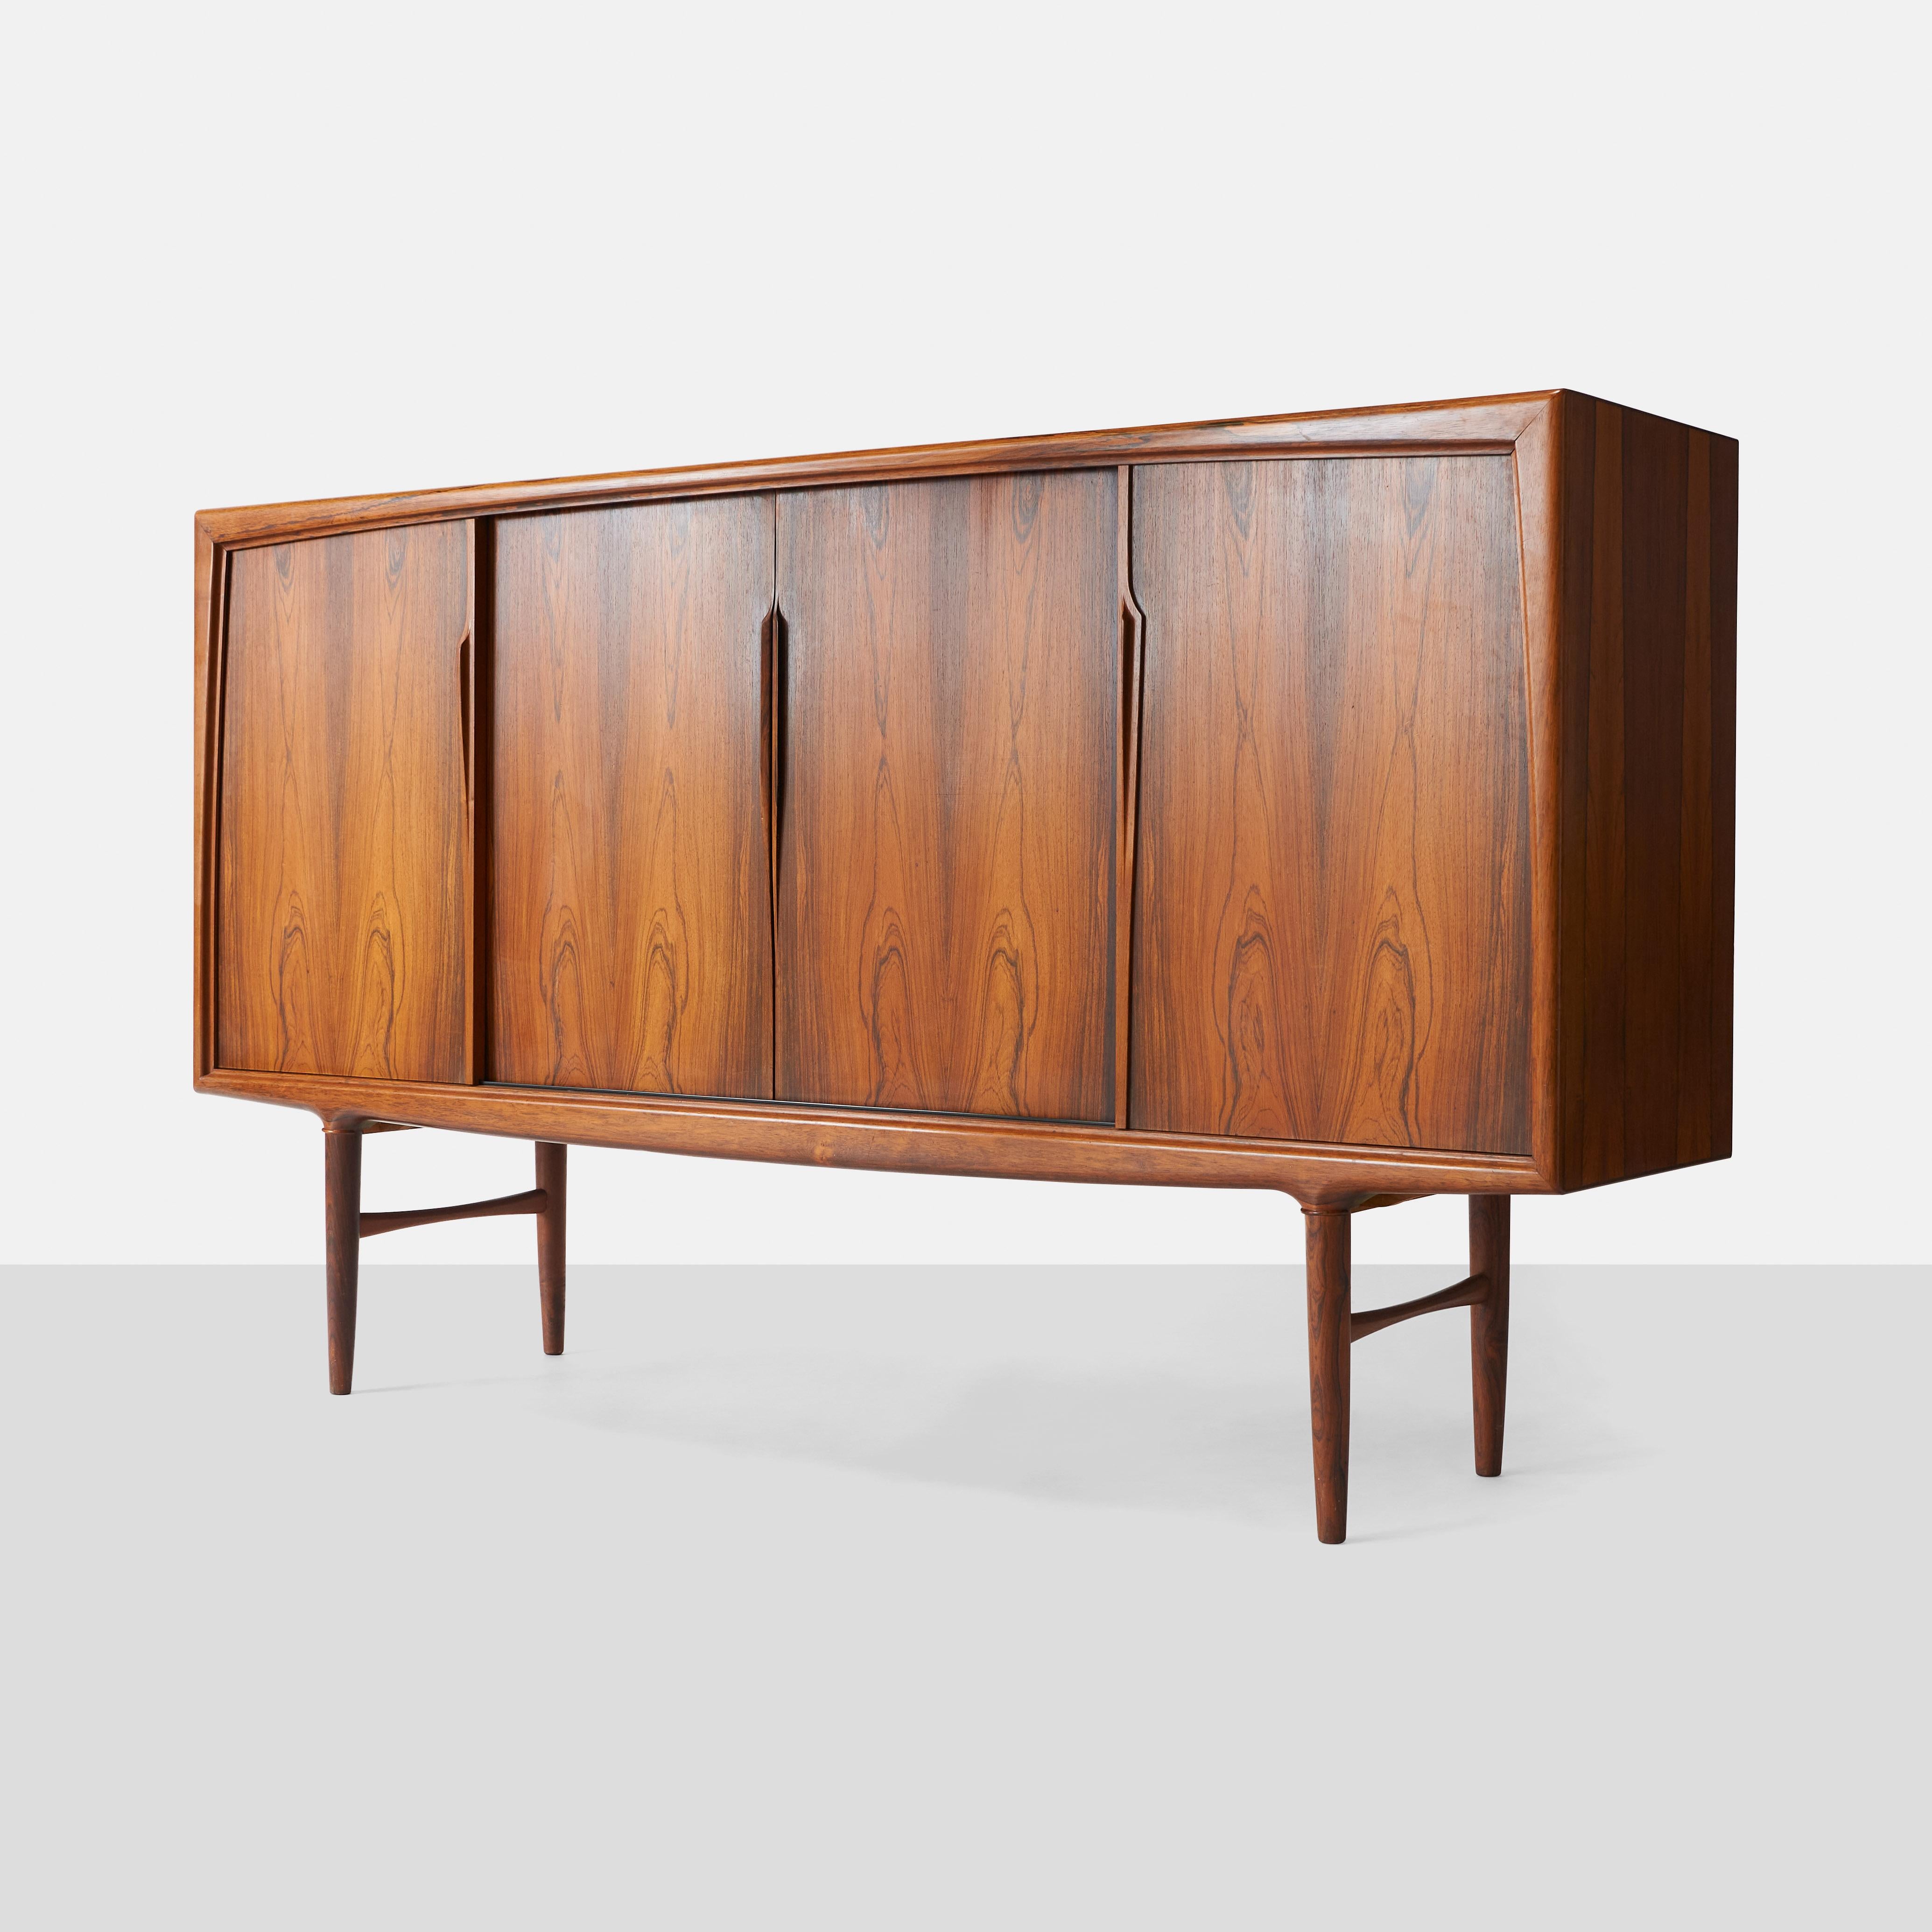 A lovely sideboard of rosewood by Omann Jun. Curved front with four sliding doors enclosing adjustable shelve and five lined drawers. Rosewood interior.

Model #19.